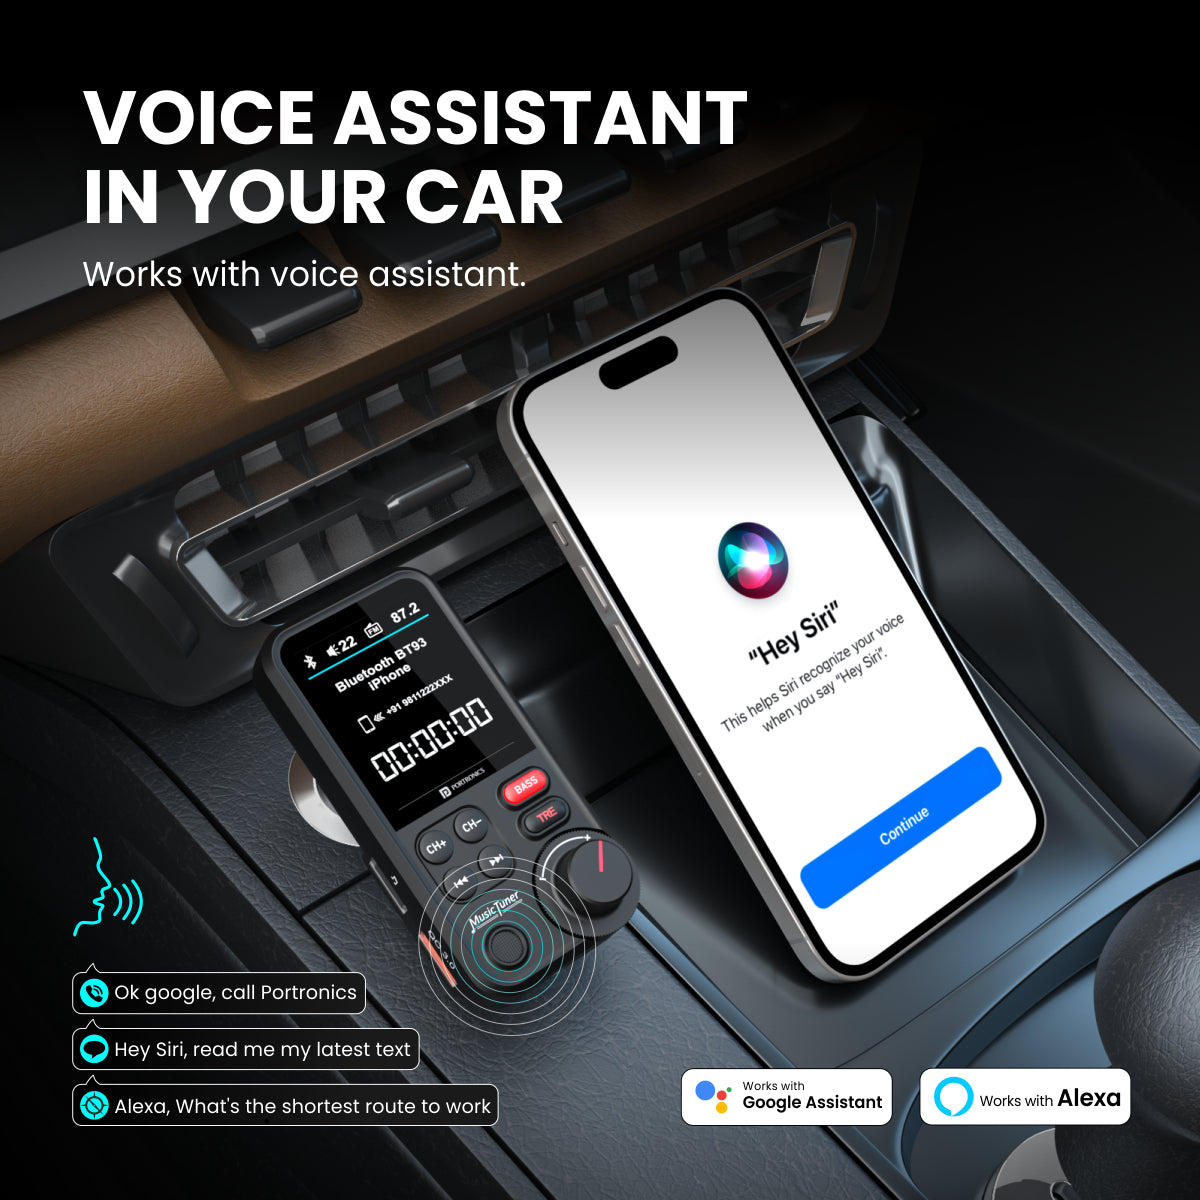 Black Portronics Auto One Bluetooth Car Stereo voice assistant in your car